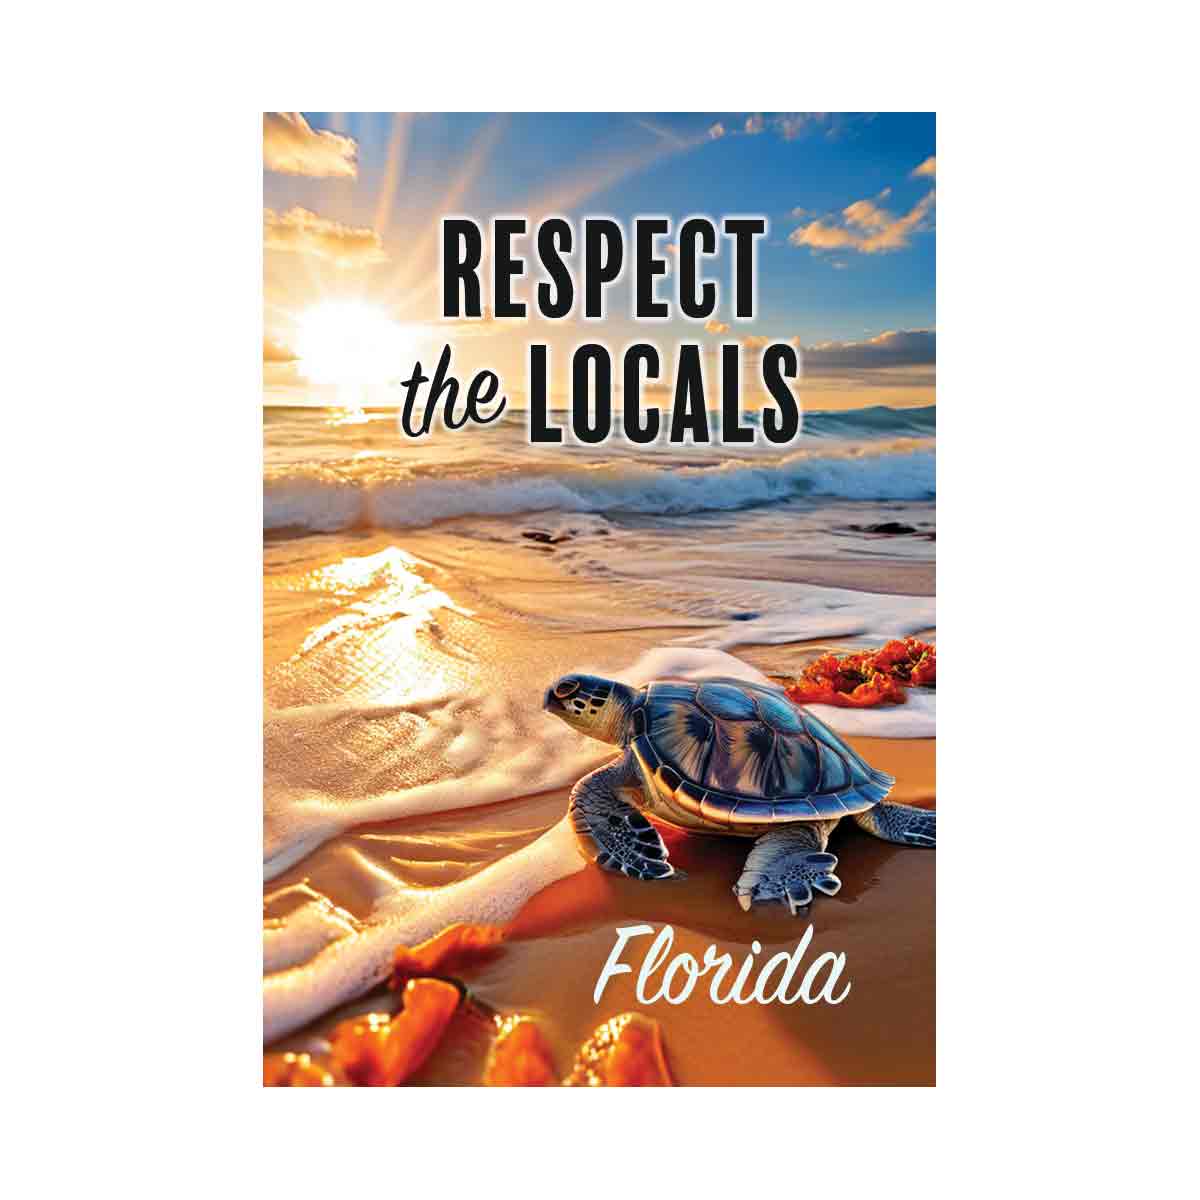 Respect the locals - Baby Turtles